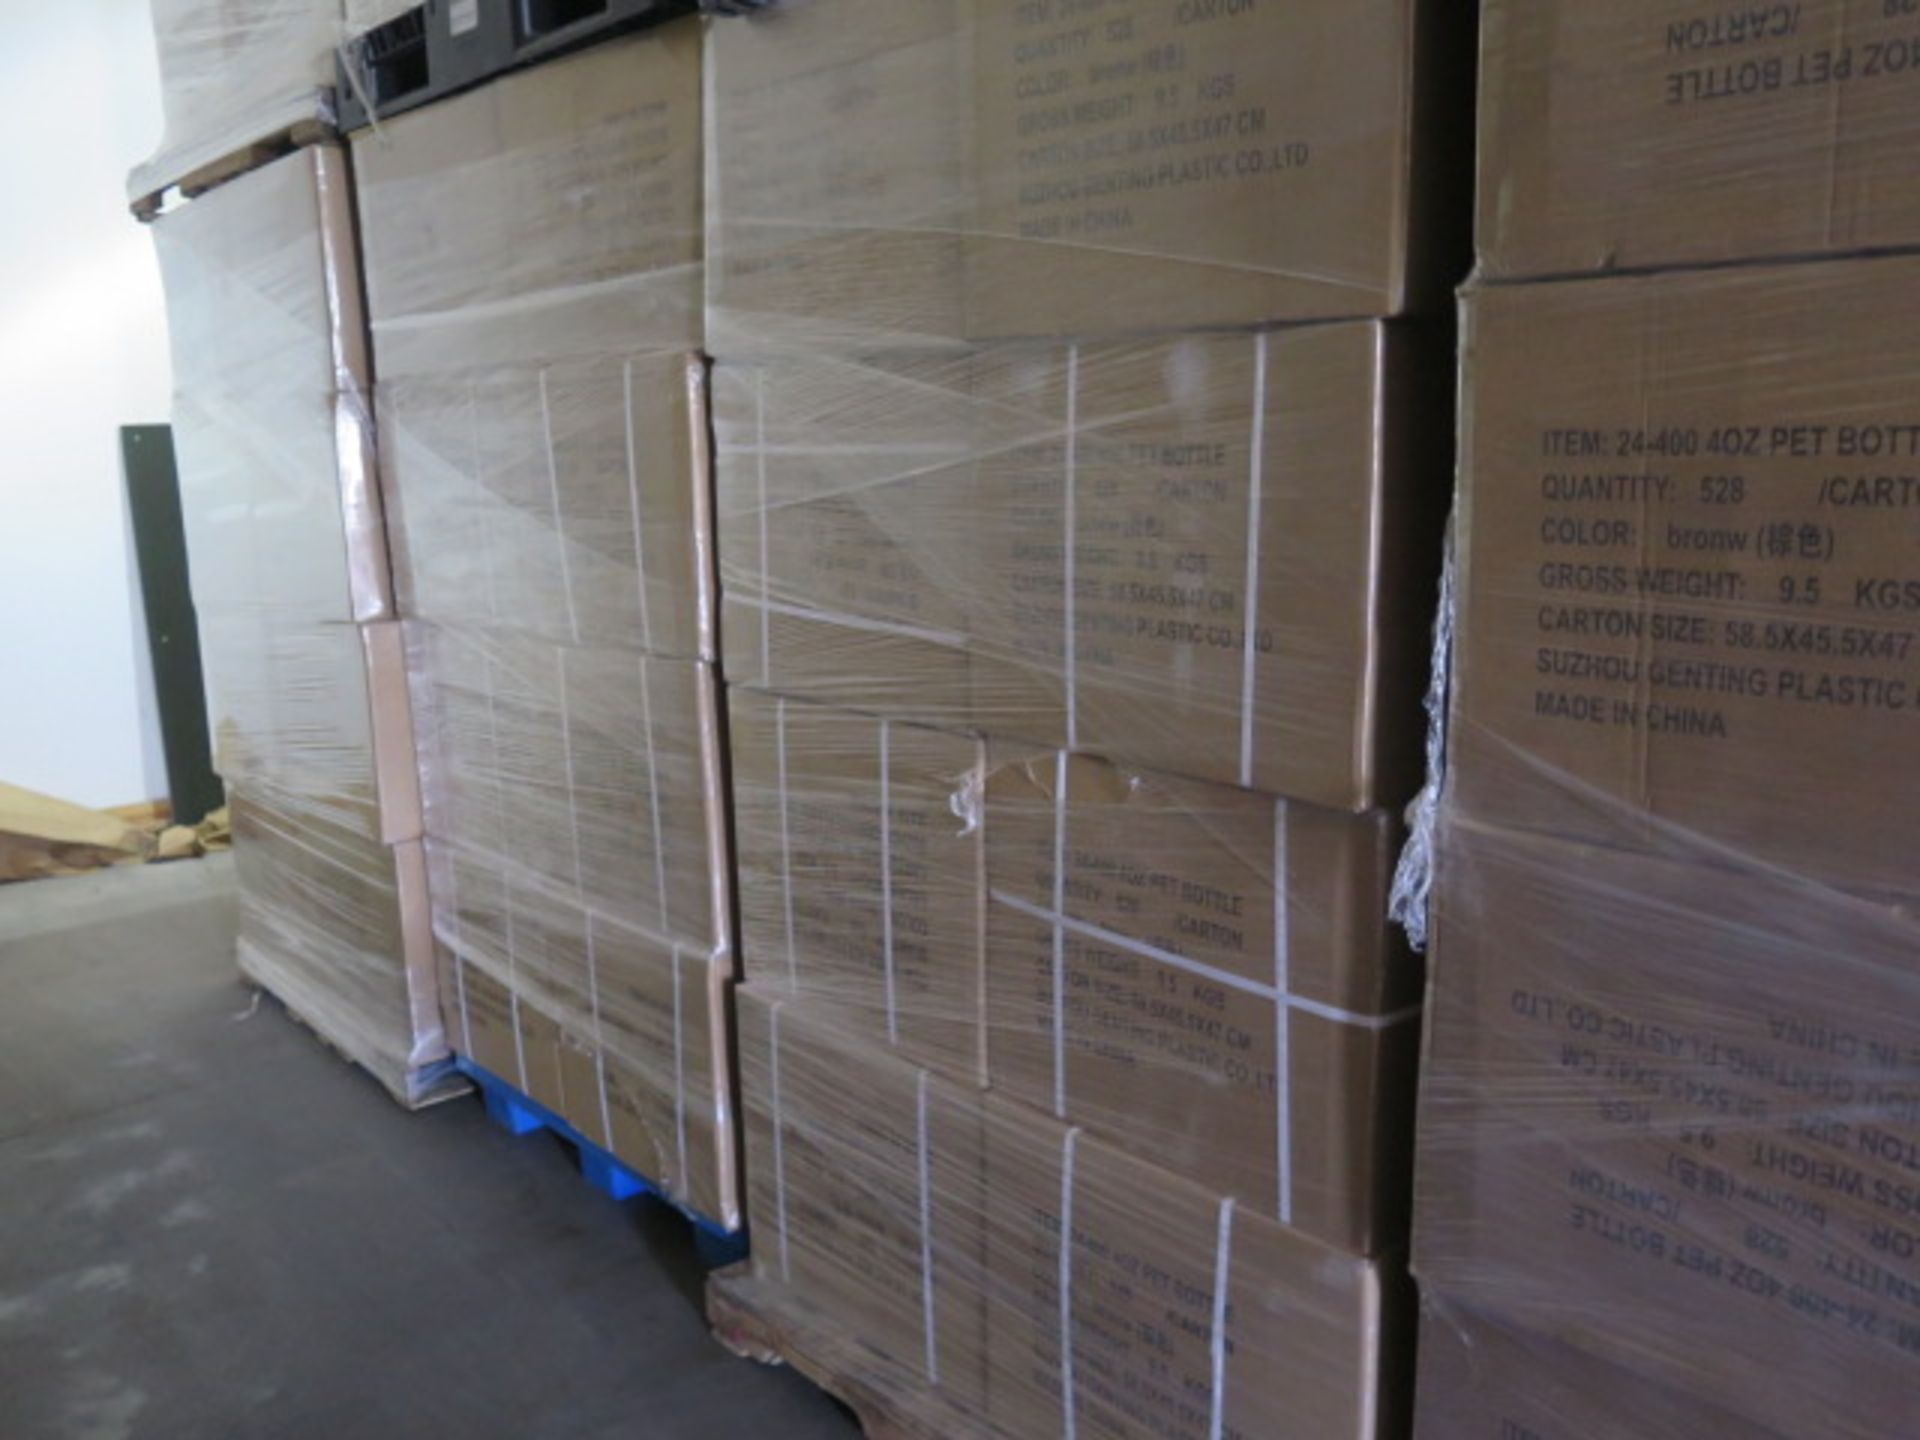 4 oz Brown 24-400 Plastic Bottles (16-Pallets) (Approx 135,000 Bottles) (SOLD AS-IS - NO WARRANTY) - Image 8 of 8